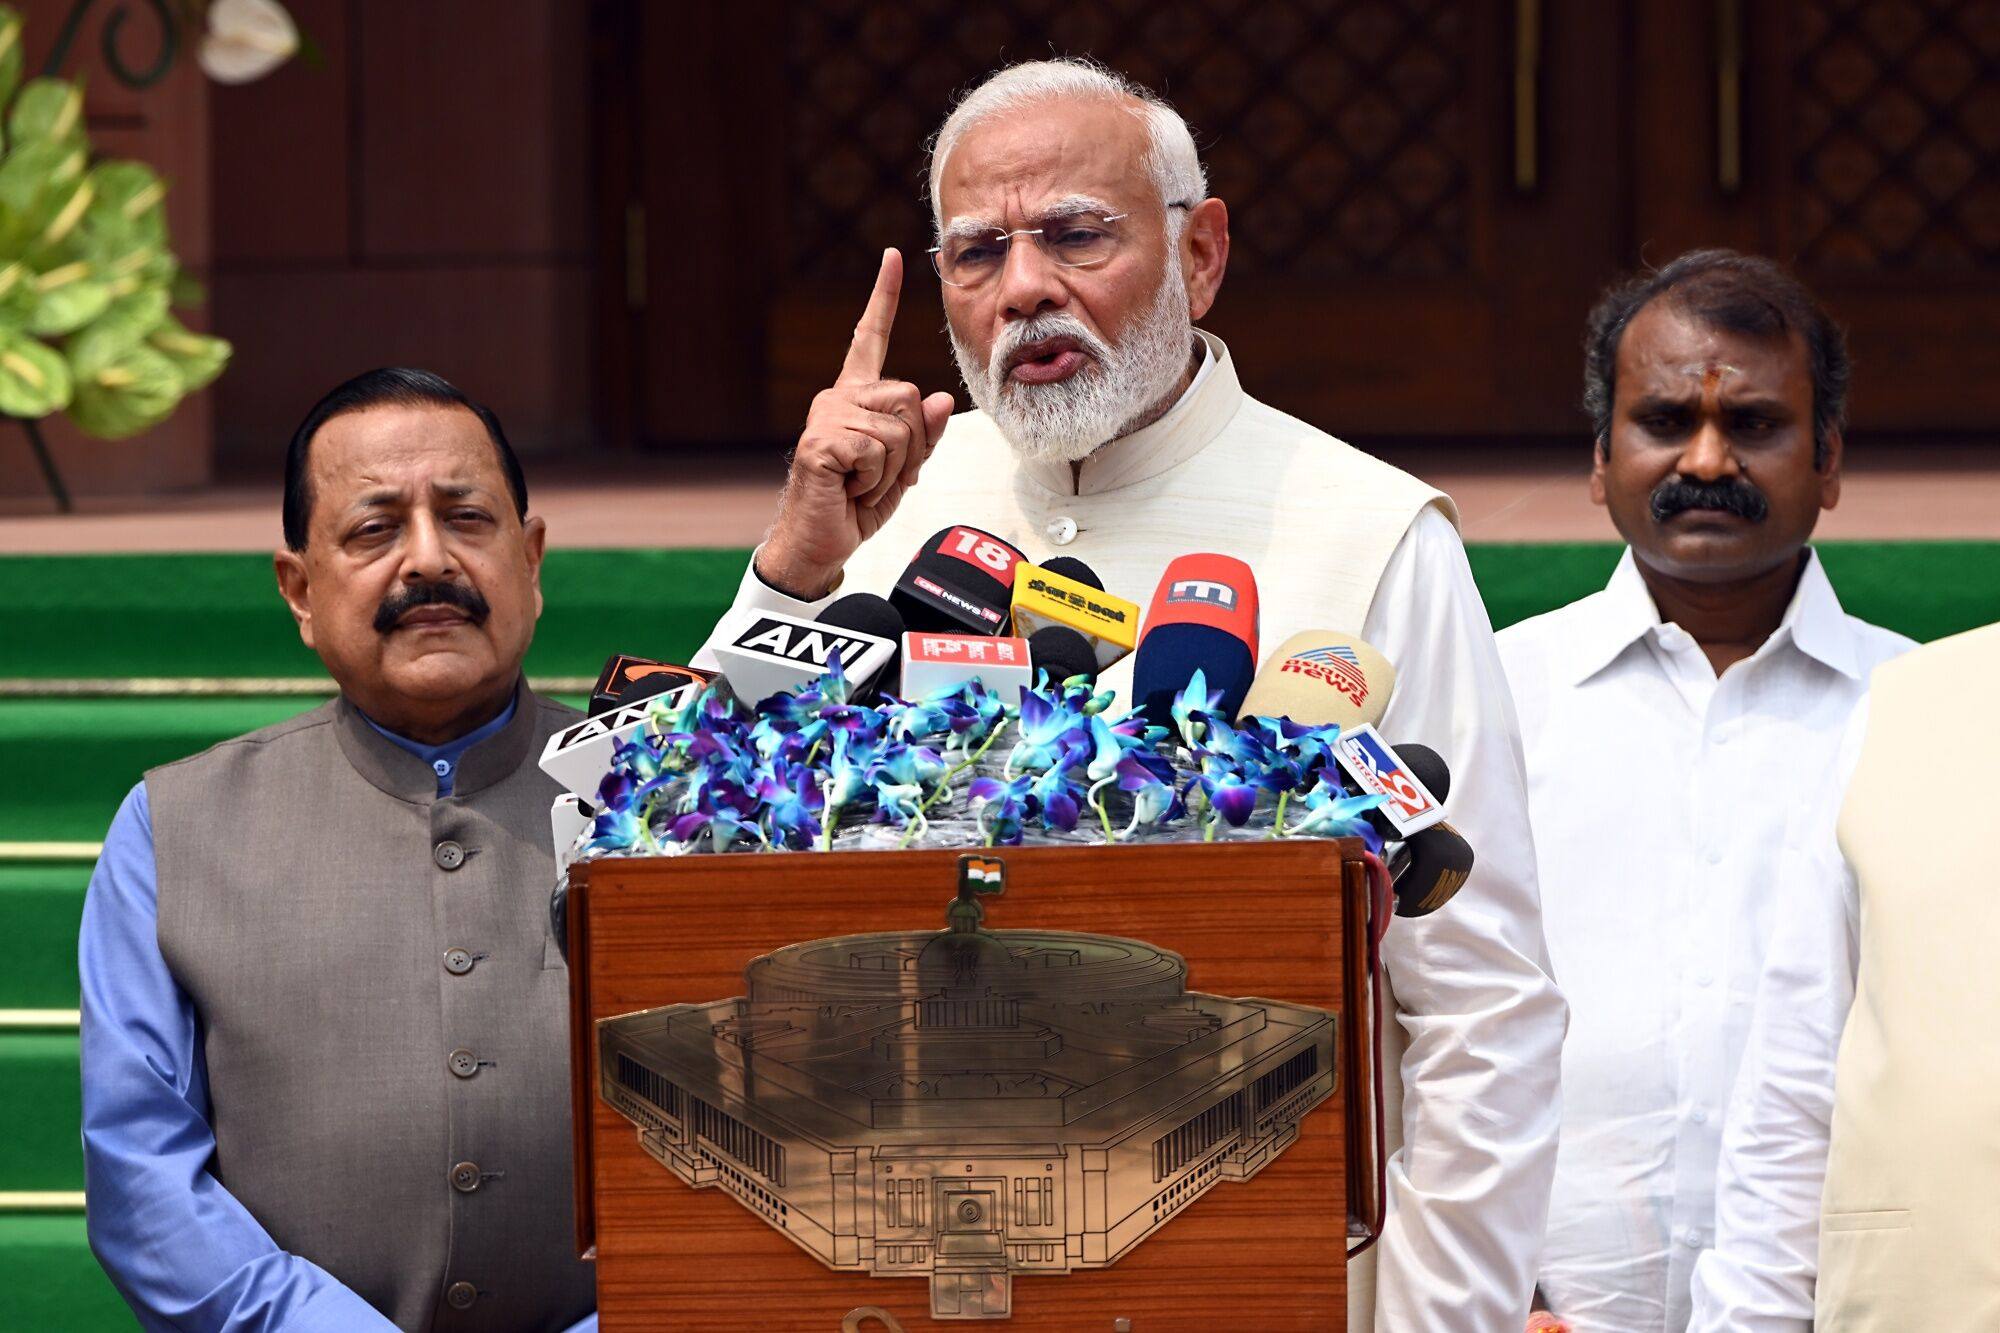 Narendra Modi, India’s prime minister, speaks during a news conference in New Delhi last month. Photo: Bloomberg